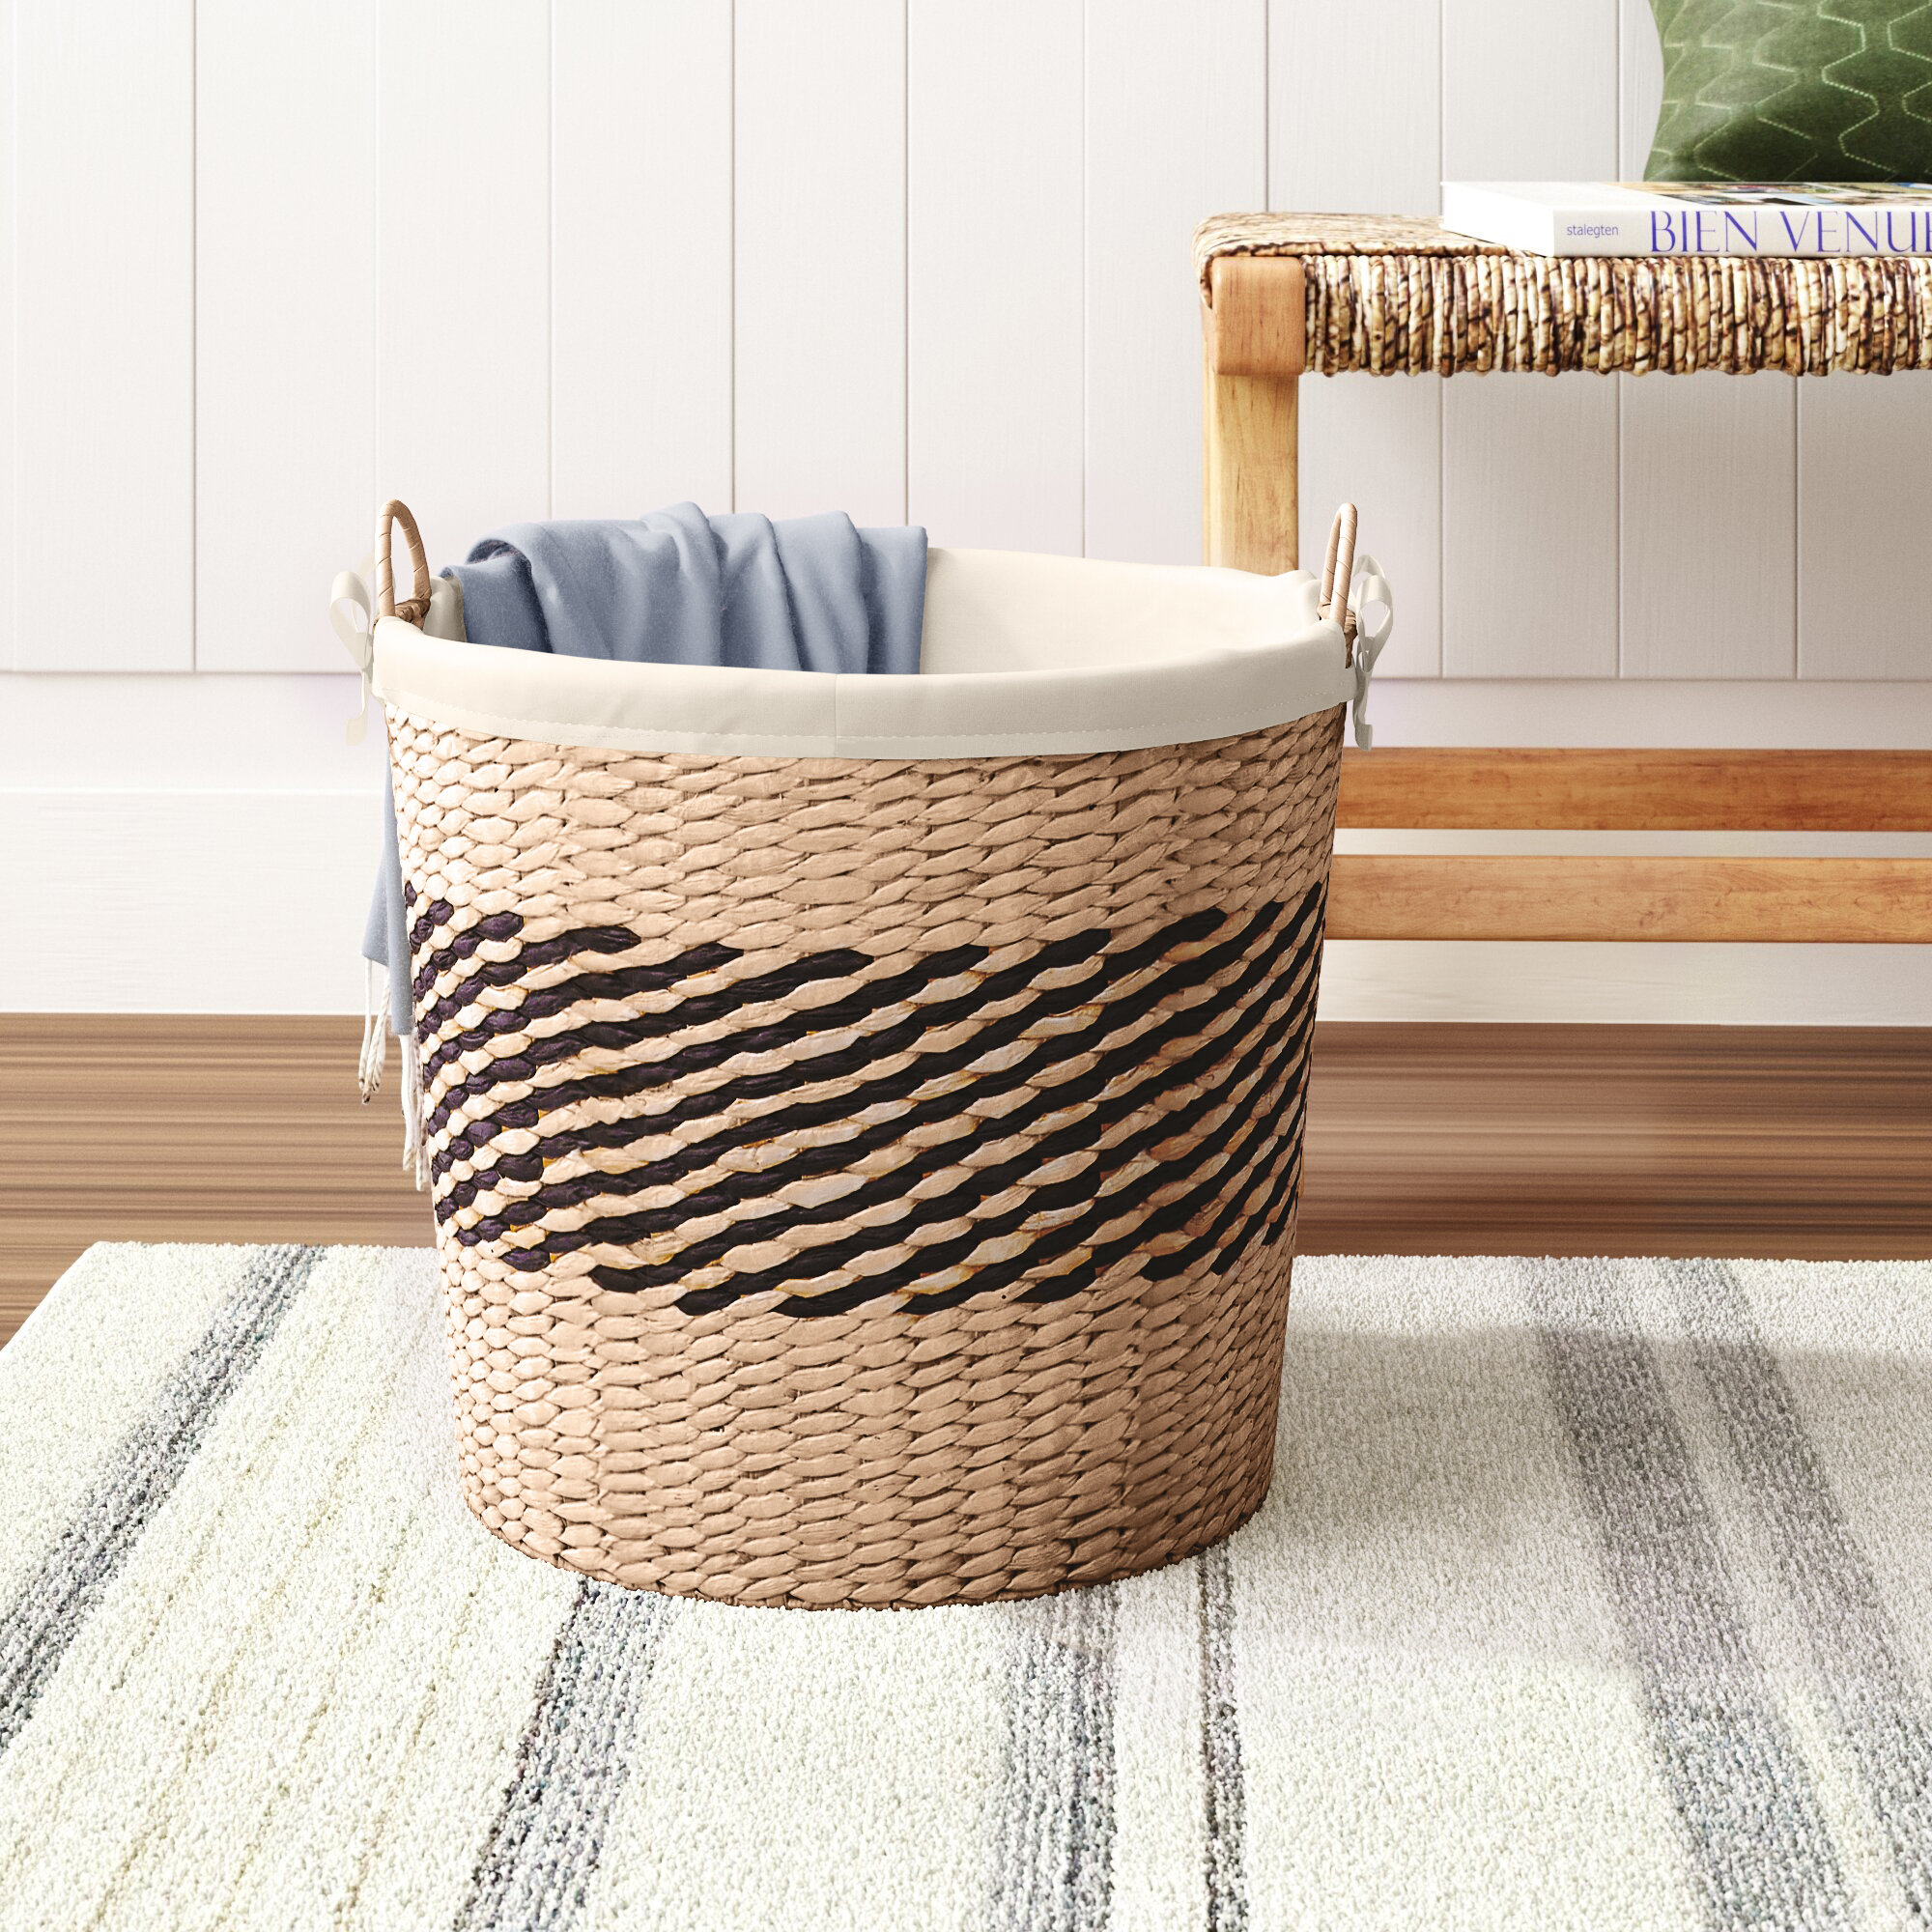 Blanket Beautiful Gold Stitch Woven Basket With Heavy Duty Leather Handles Baby Toy or Laundry Storage Bin Large and Tall Basket for Nursery Cotton Rope Basket 20 x 18 Jumbo Size Towel 